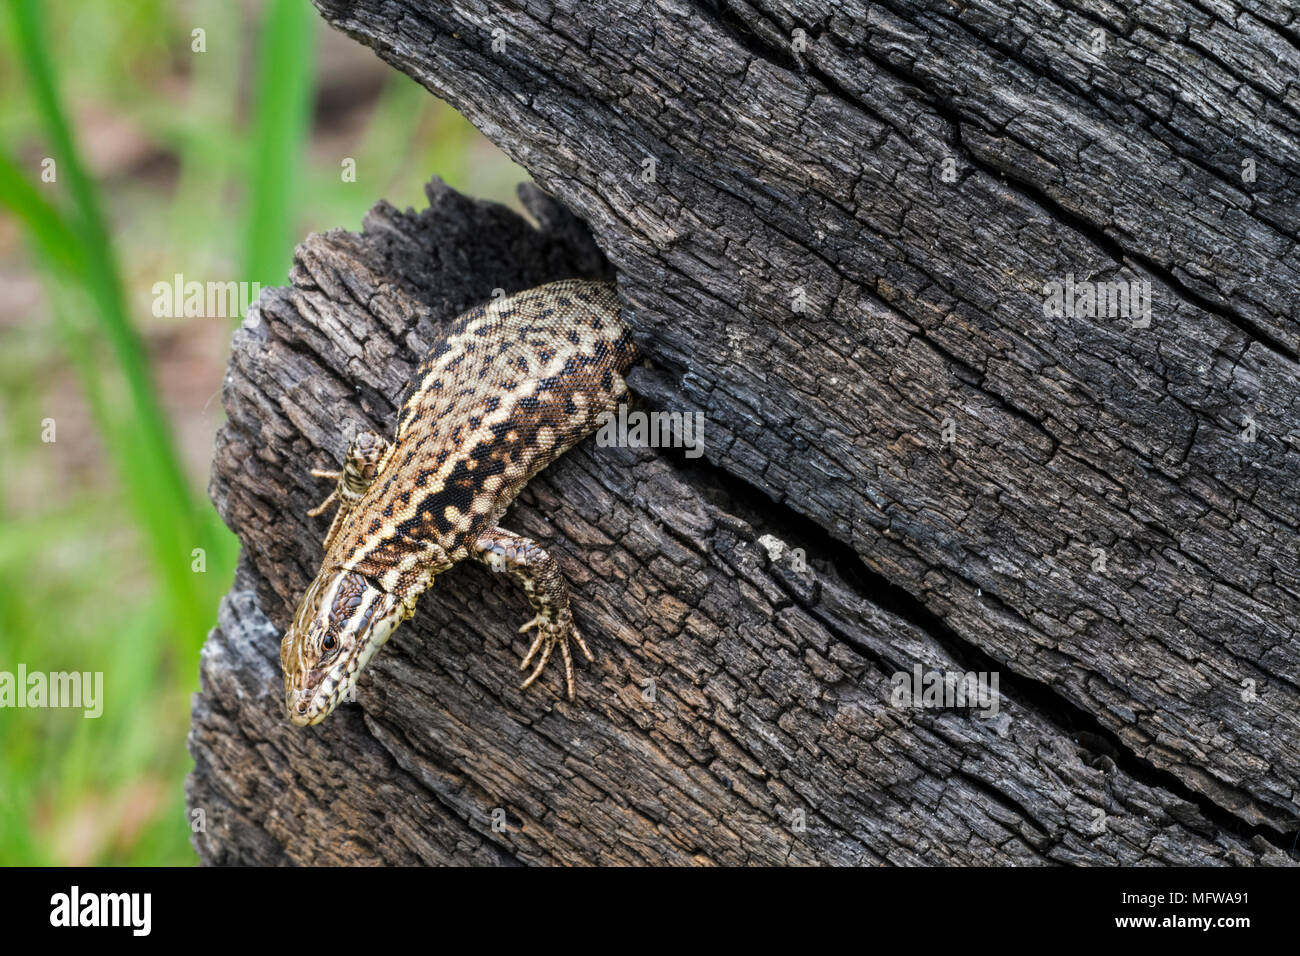 Common wall lizard (Podarcis muralis / Lacerta muralis) emerging from gap in scorched tree trunk Stock Photo